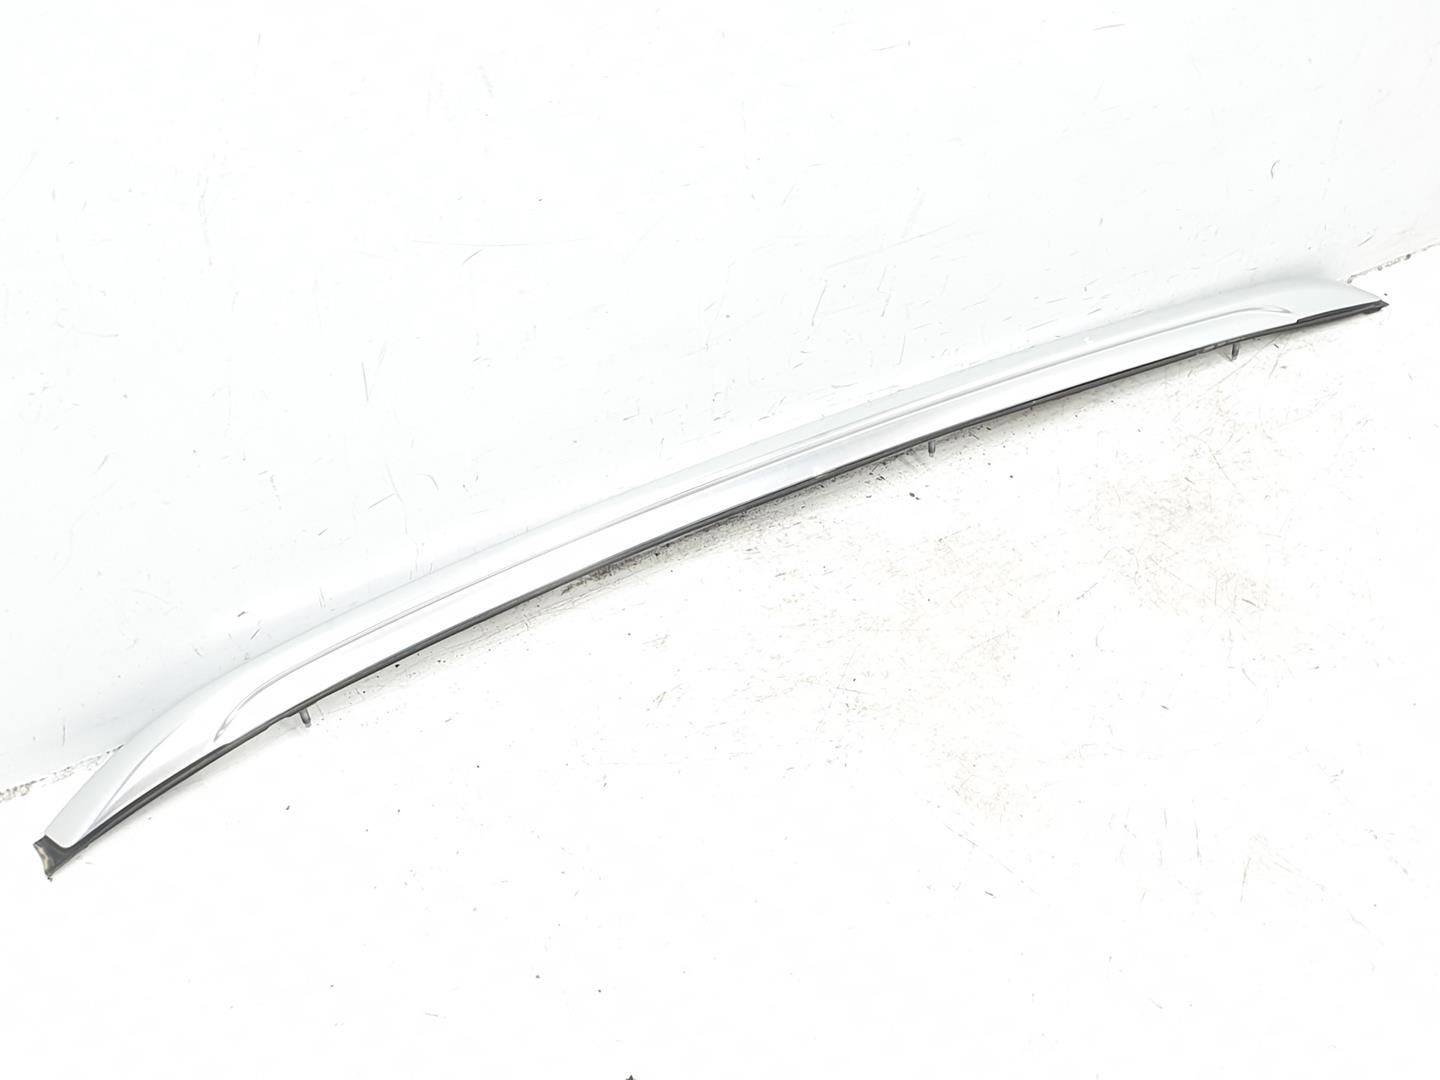 BMW X1 E84 (2009-2015) Right Side Roof Rail 2990985, 51132990985 23894525